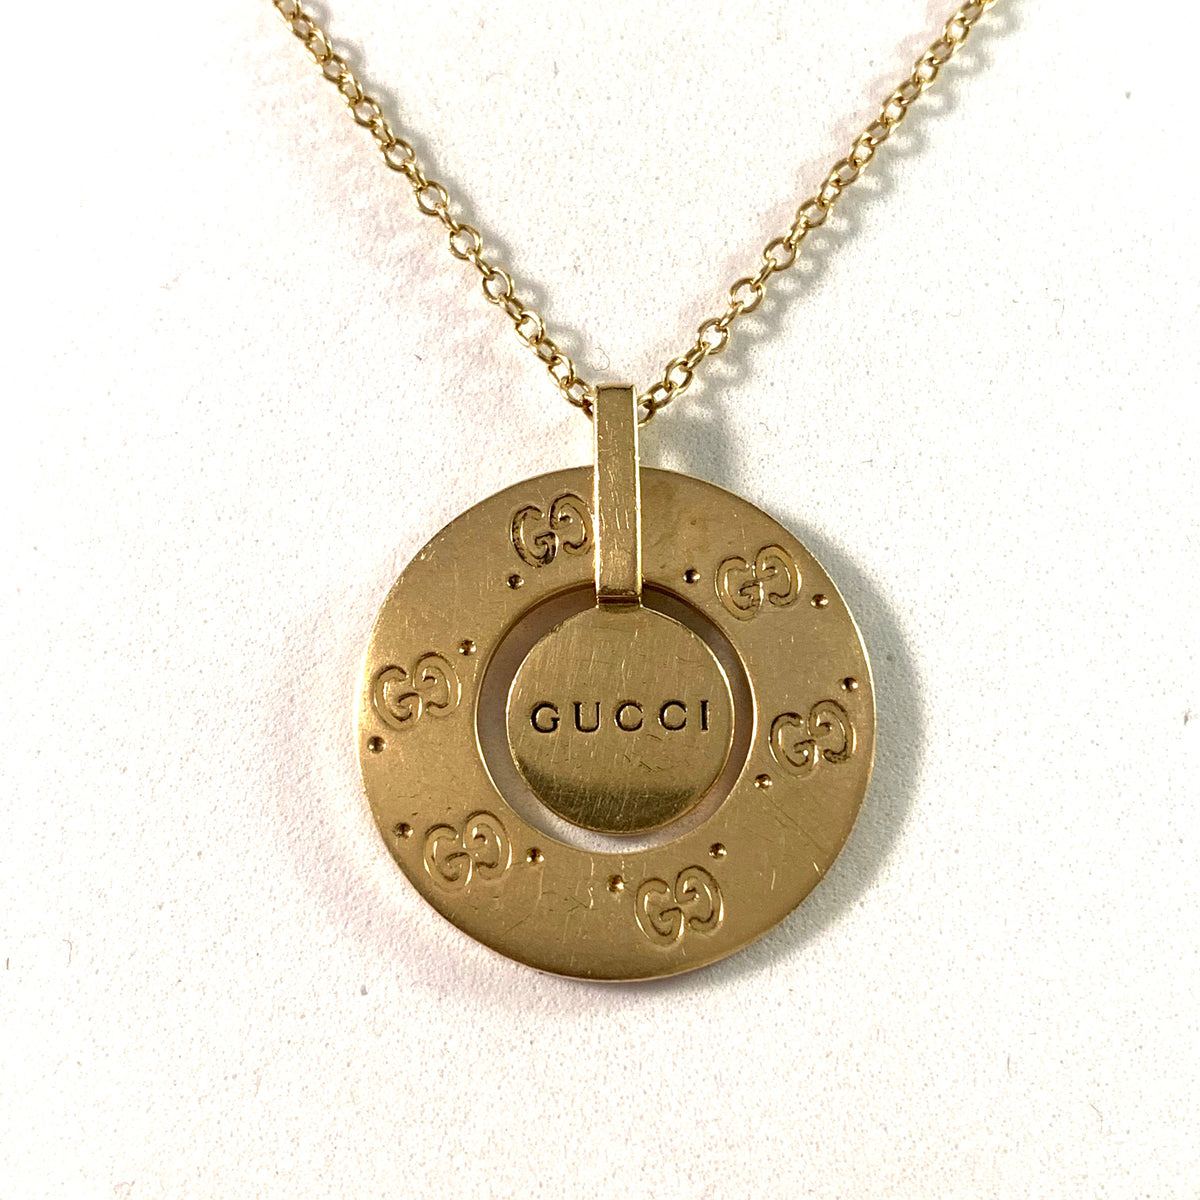 Gucci, Italy 18k Gold Pendant Necklace. Boxed. – T Niklasson Gallery